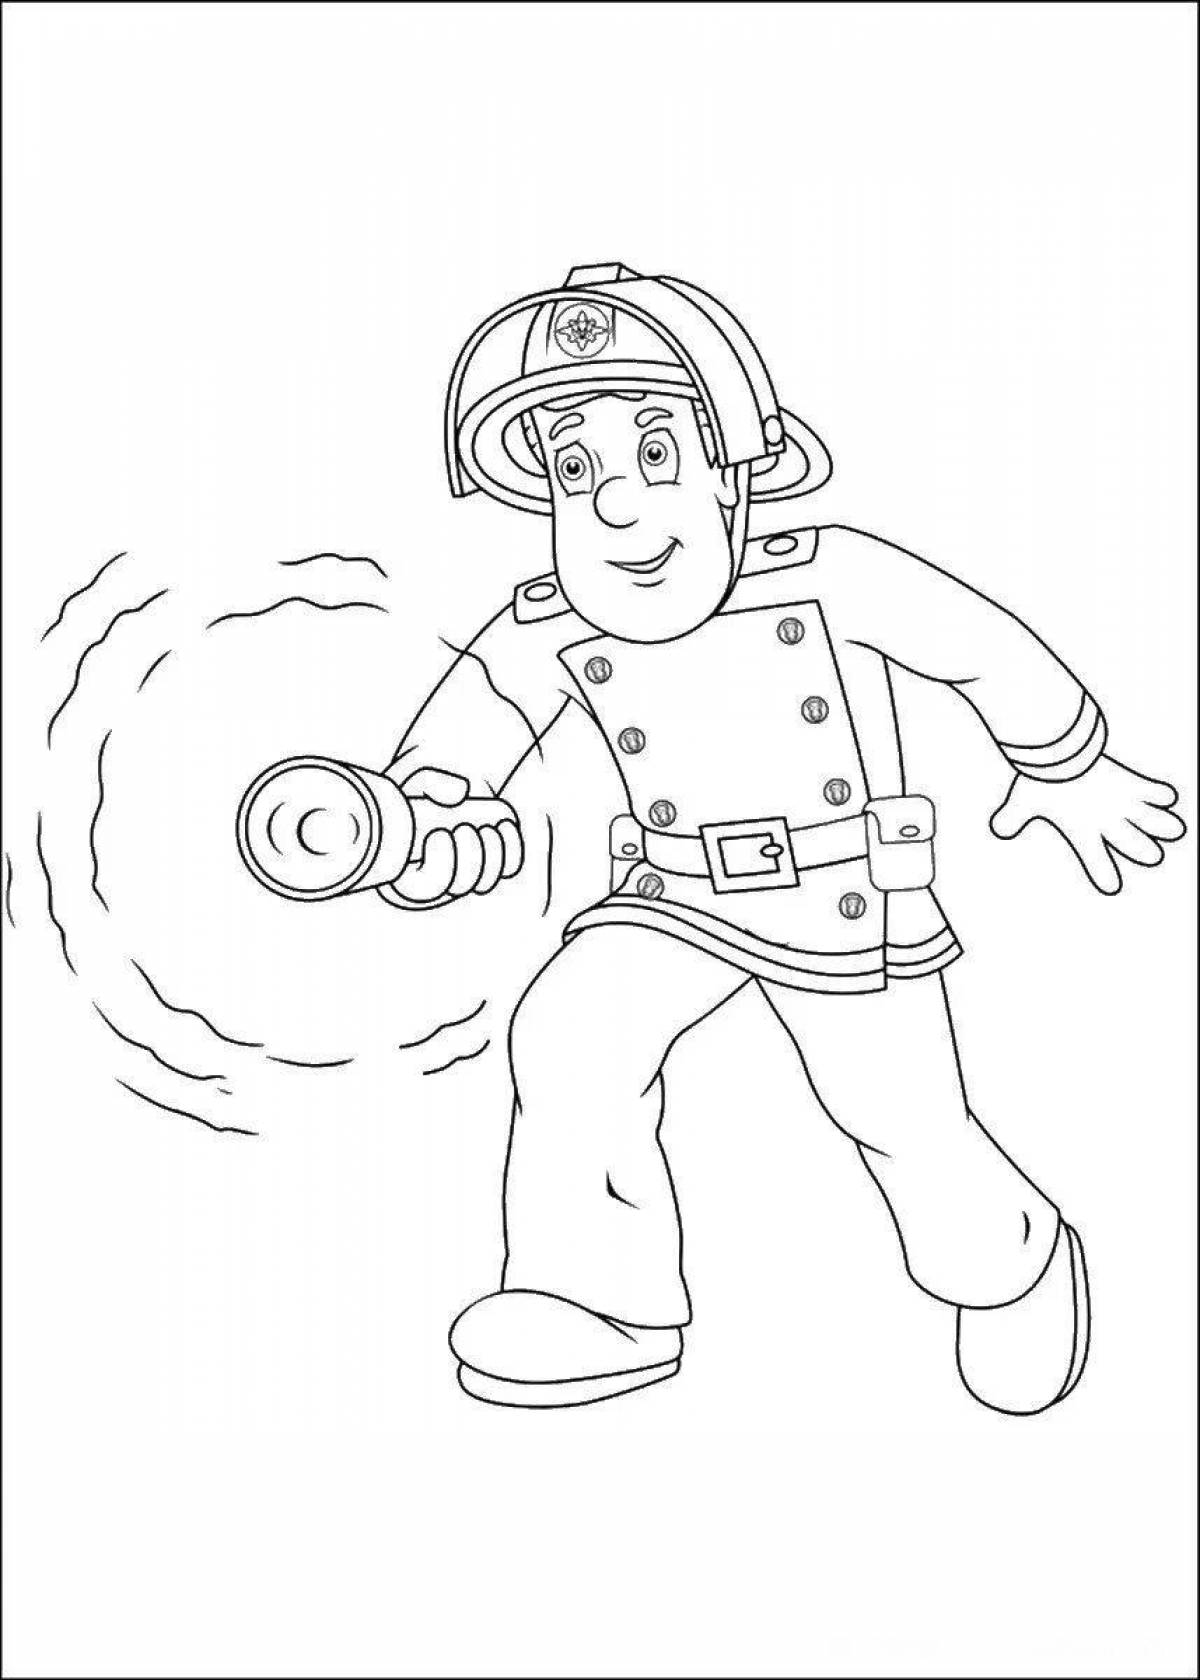 Coloring book adorable firefighter profession